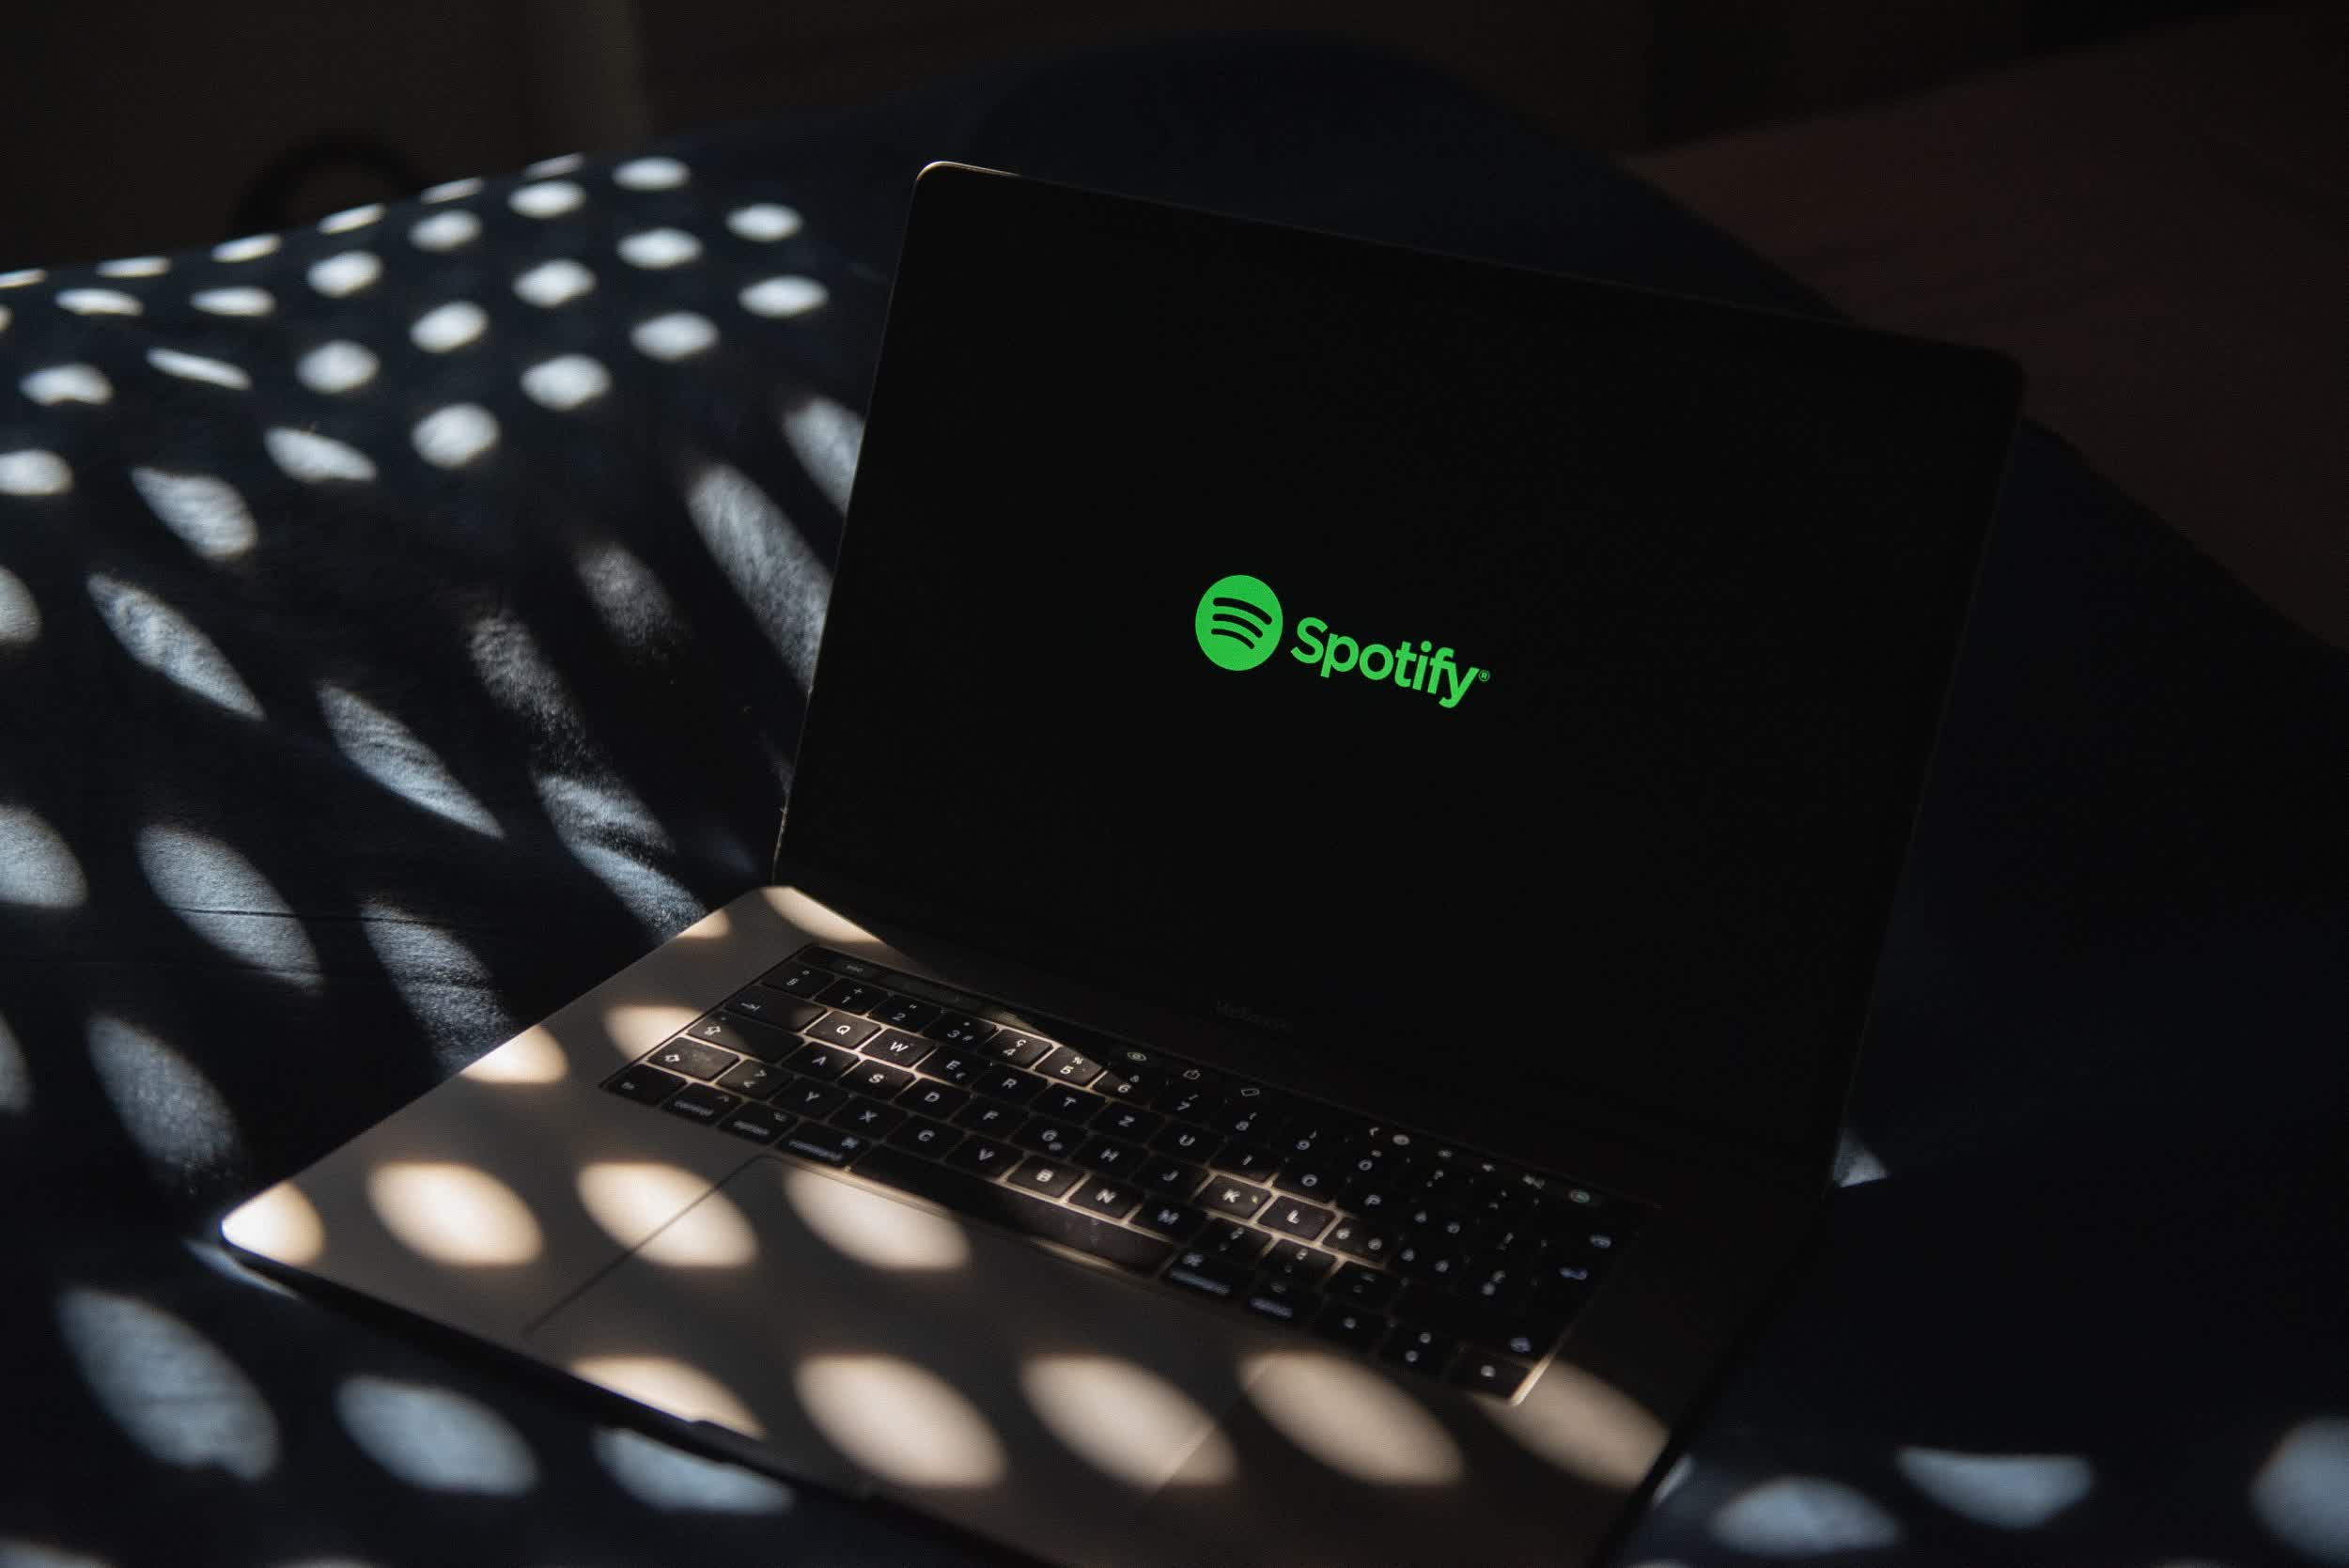 Spotify to cut 6% of jobs in latest wave of tech layoffs